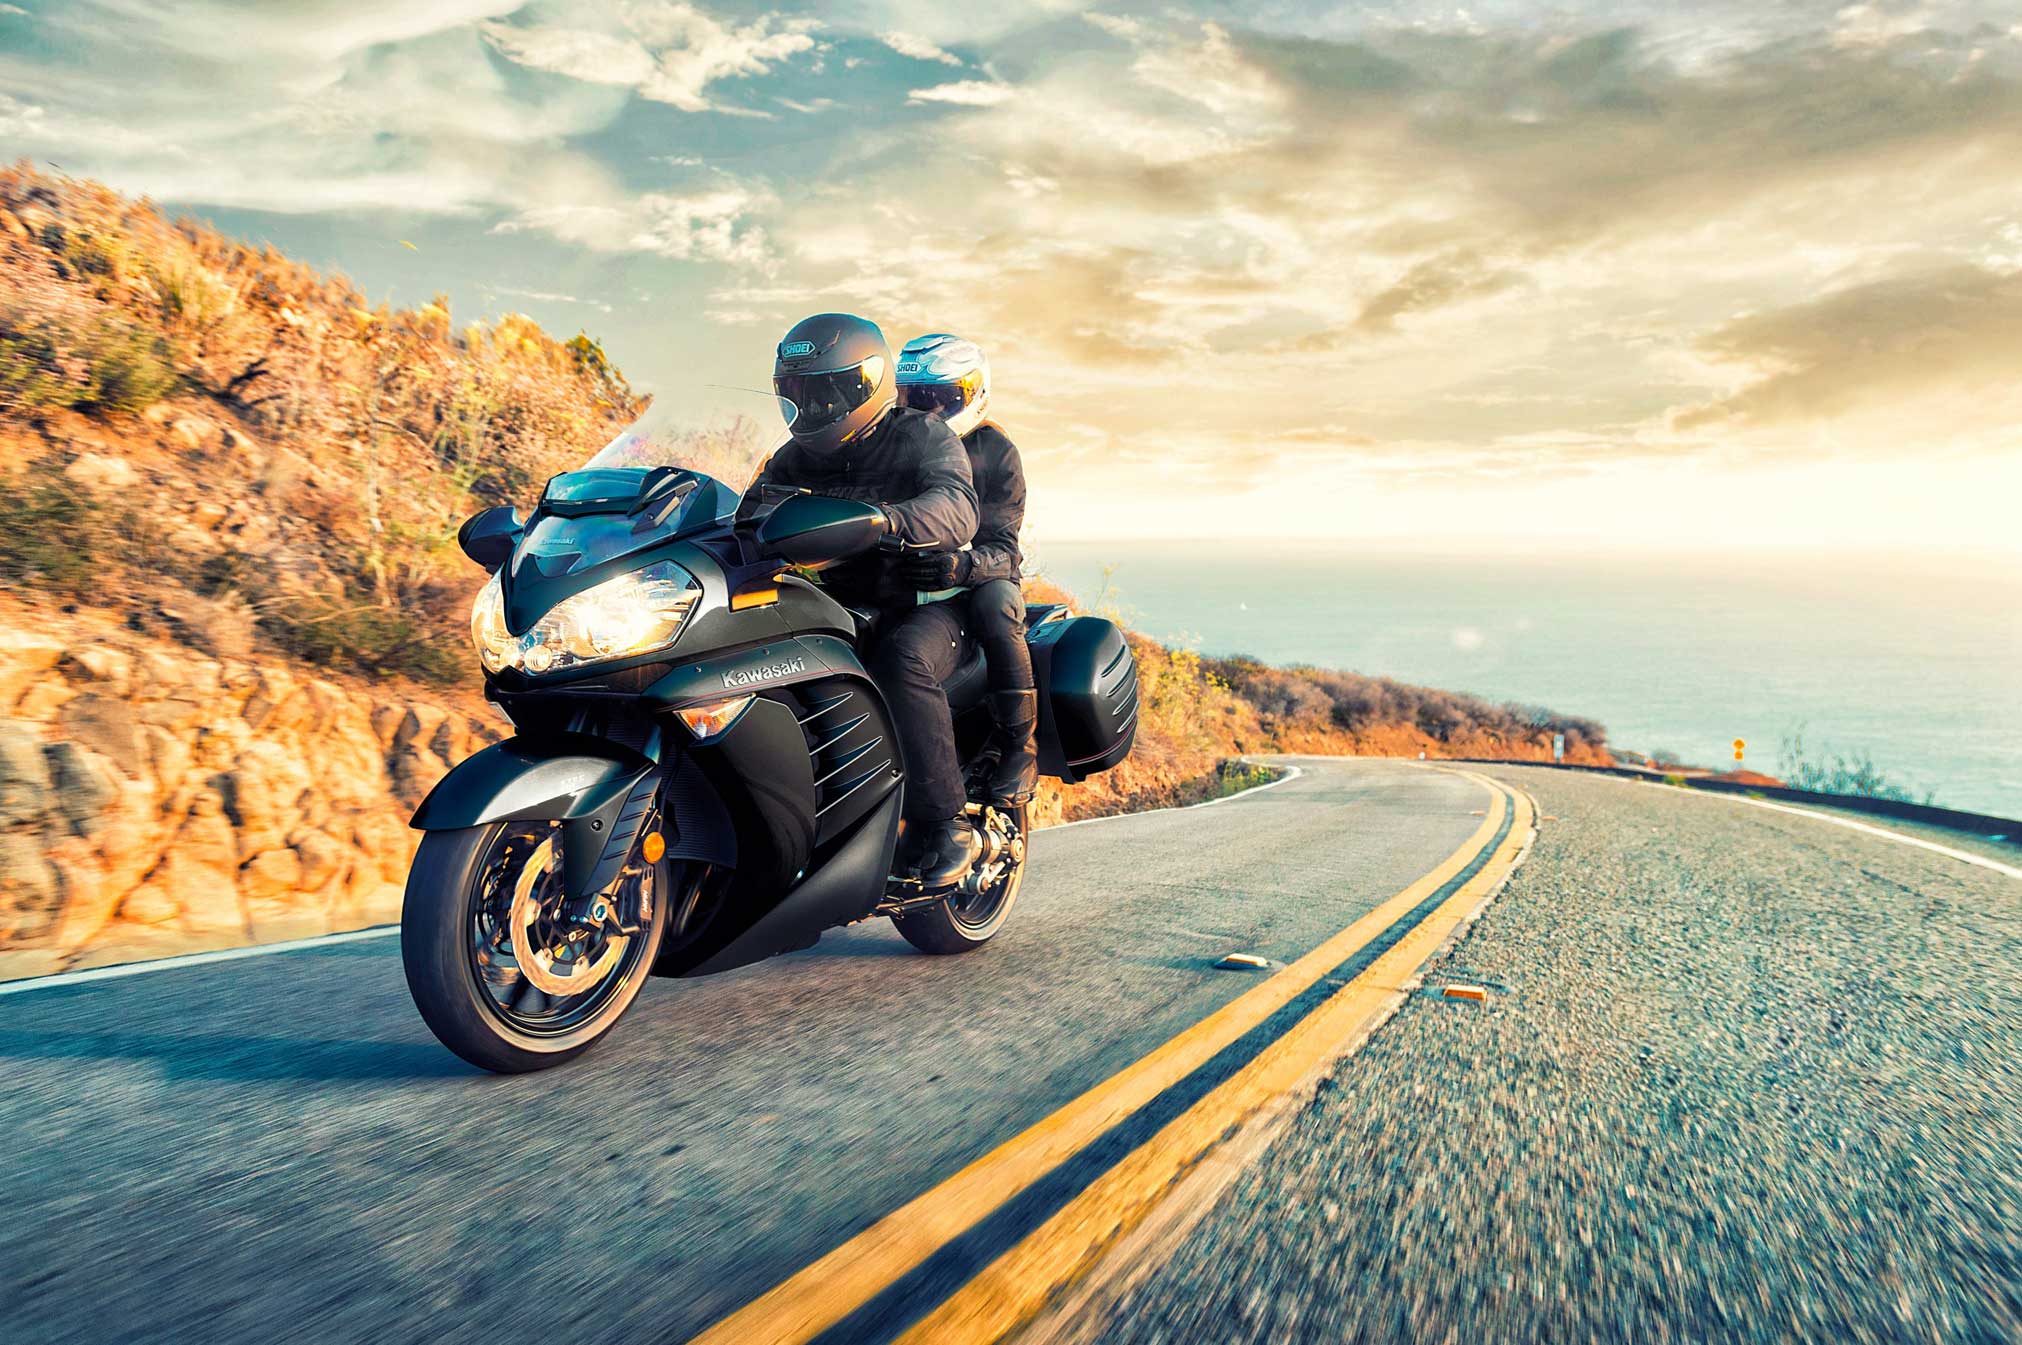 With Kawasaki Ninja sportbike-inspired performance, the Concours 14 ABS pro...